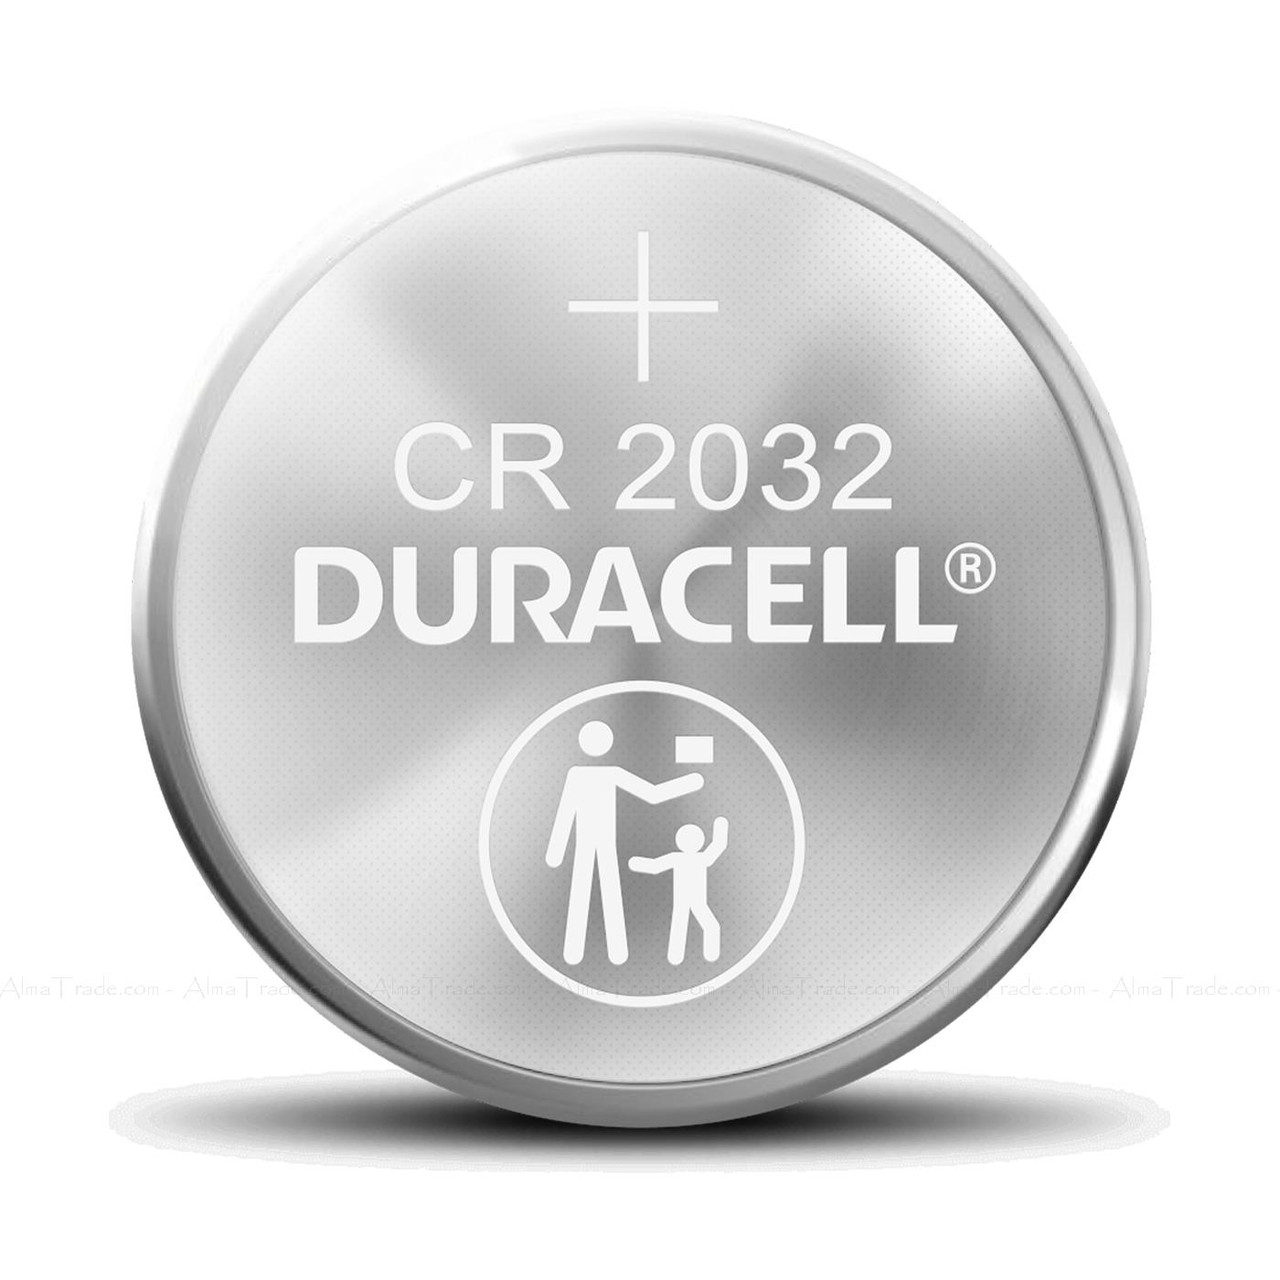 Duracell Lithium 2032 Coin Batteries, 12-count. 